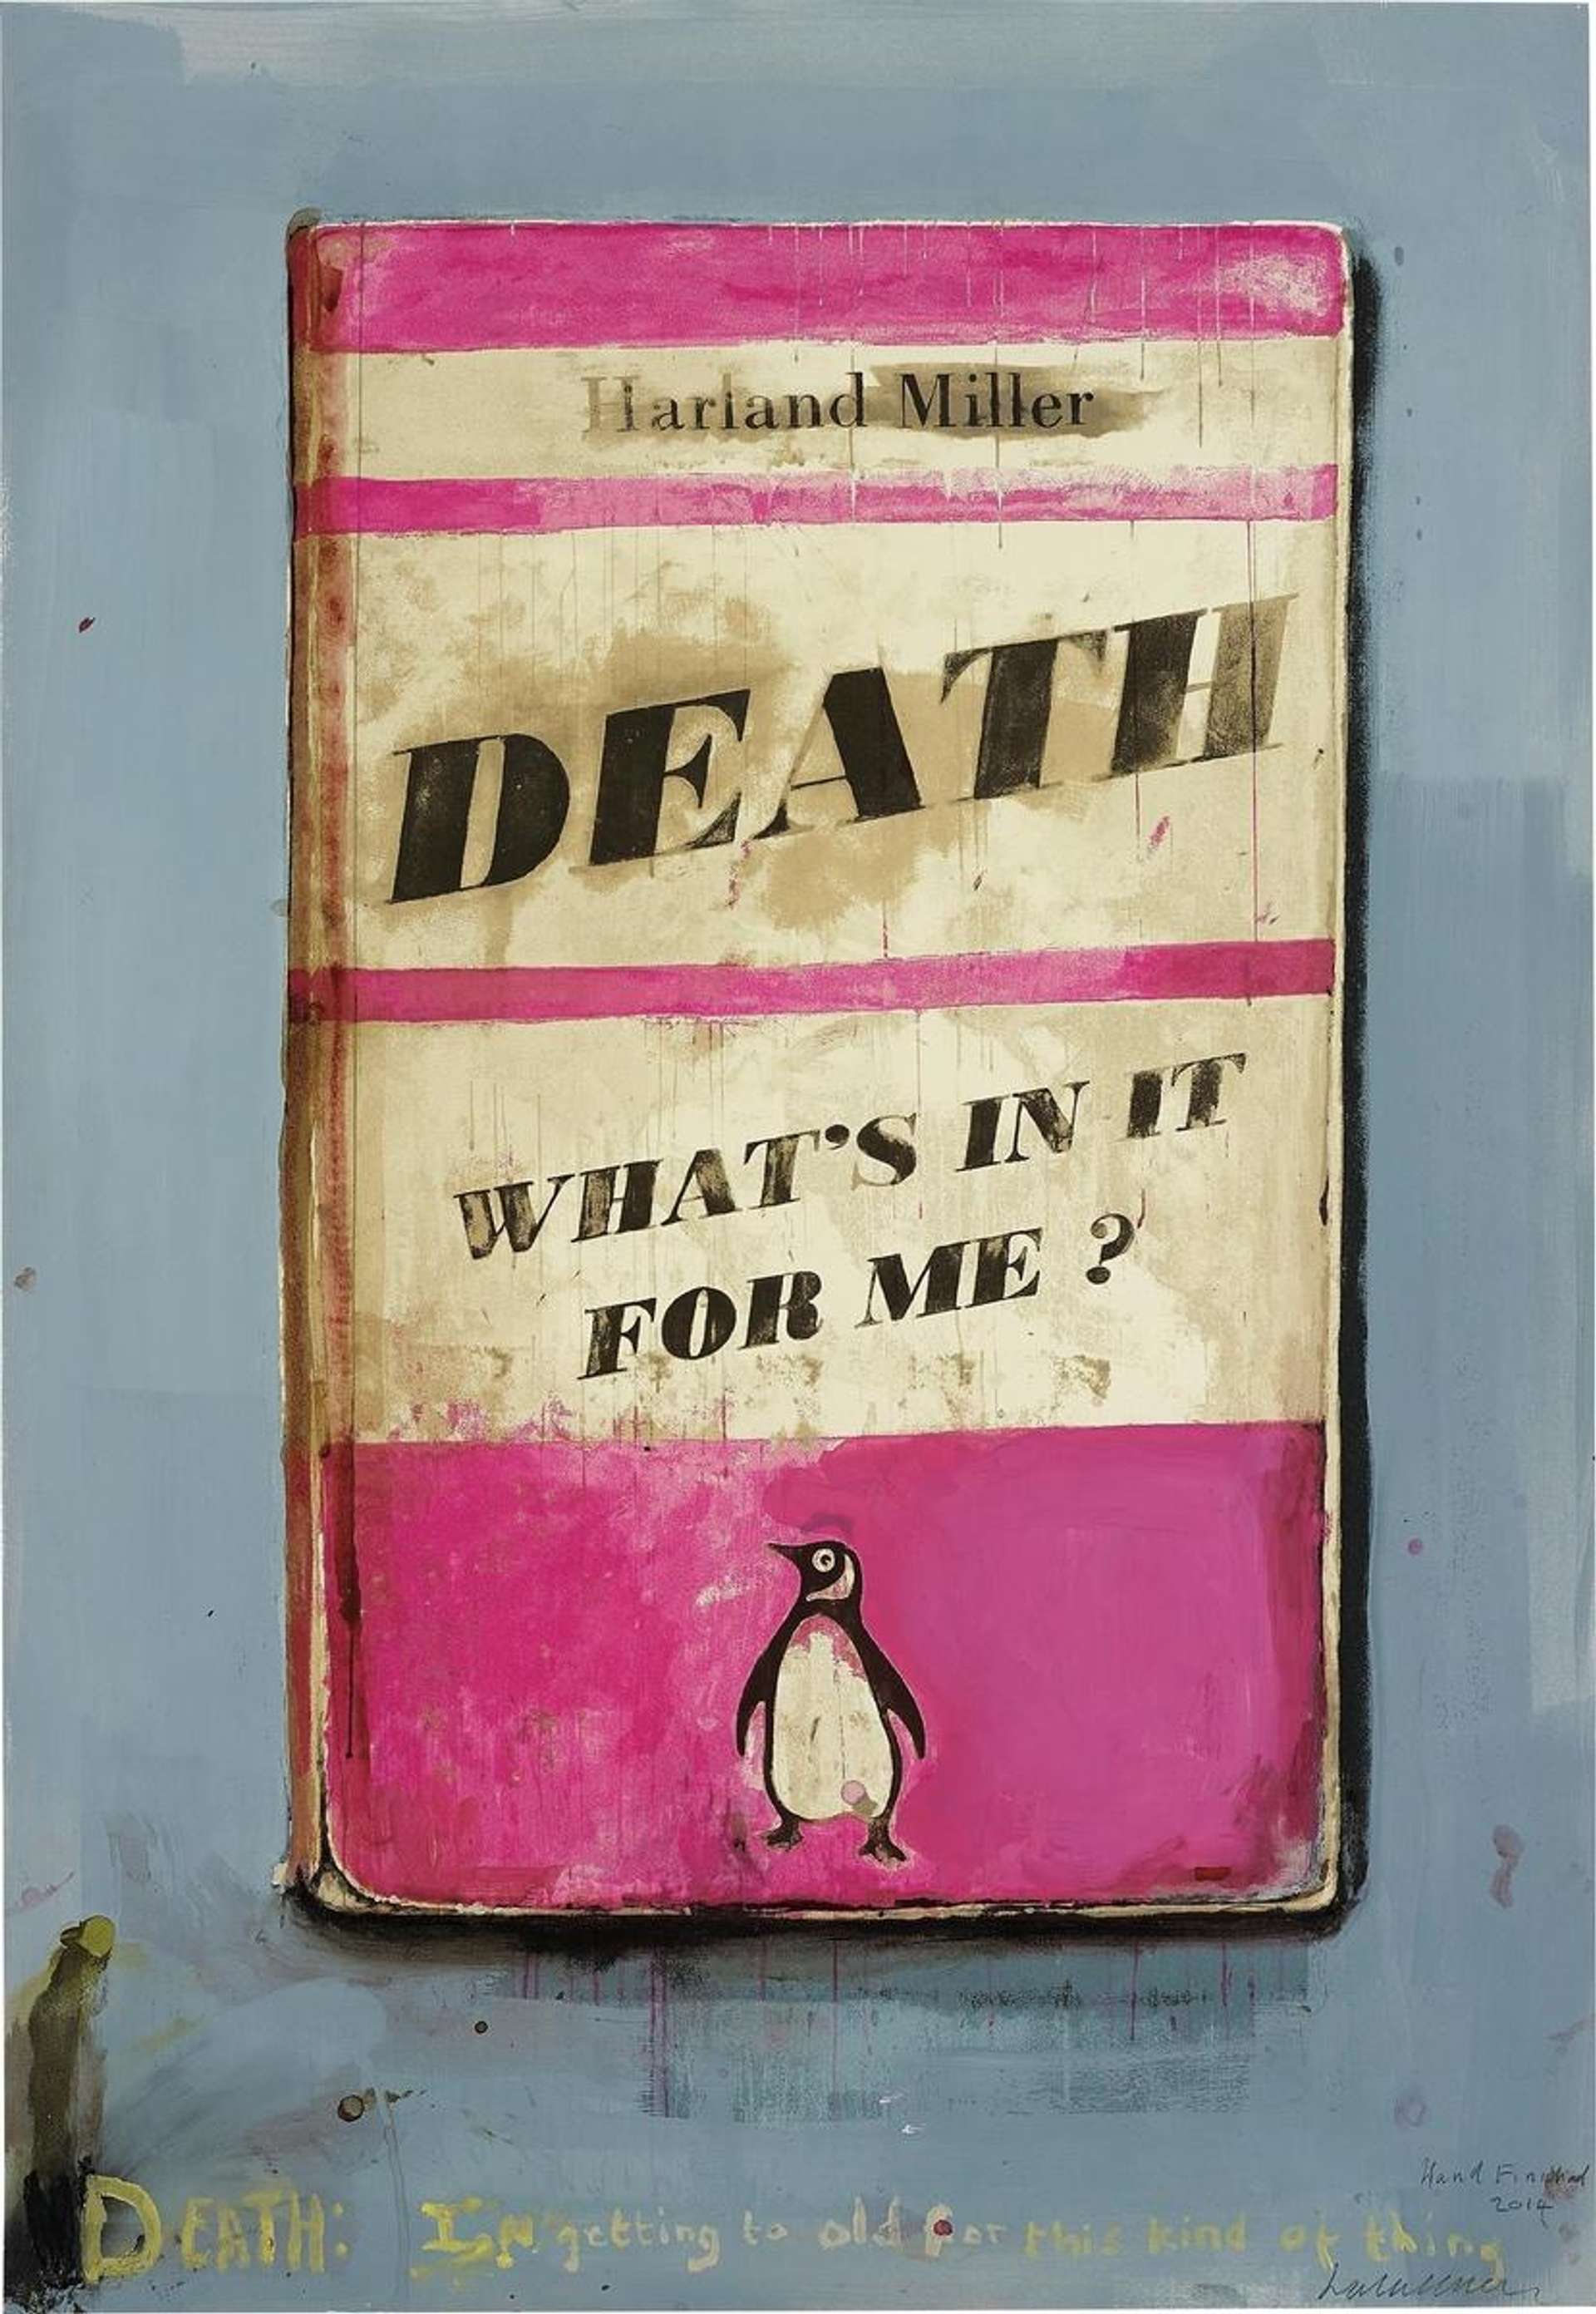 Death, What's In It For Me? by Harland Miller